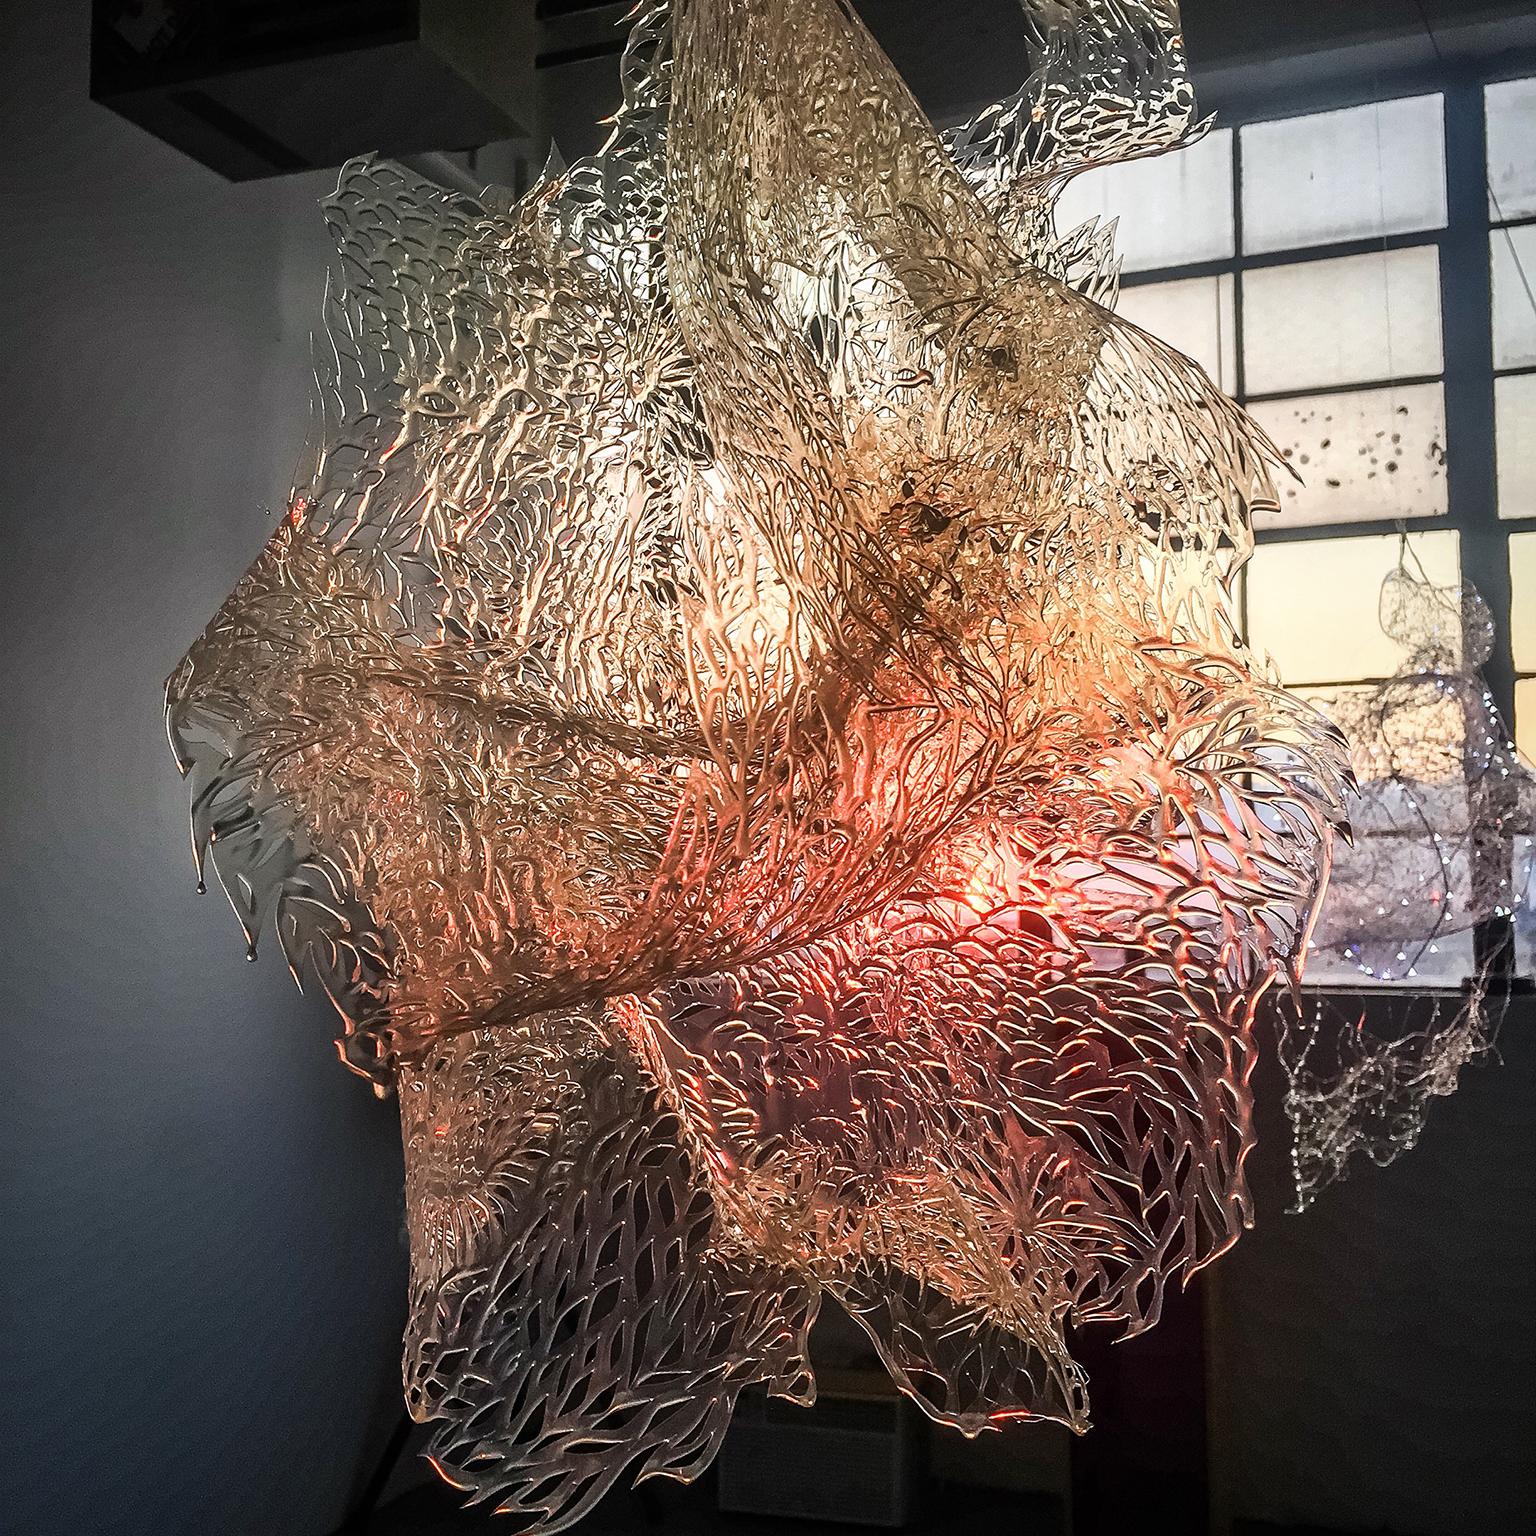 Medium: hand cut plastic, pigment, dichroic, resin, LED lights

Julia Sinelnikova is an interdisciplinary artist who works with holograms, performance, and digital culture. Her light installations have been exhibited internationally, and she has